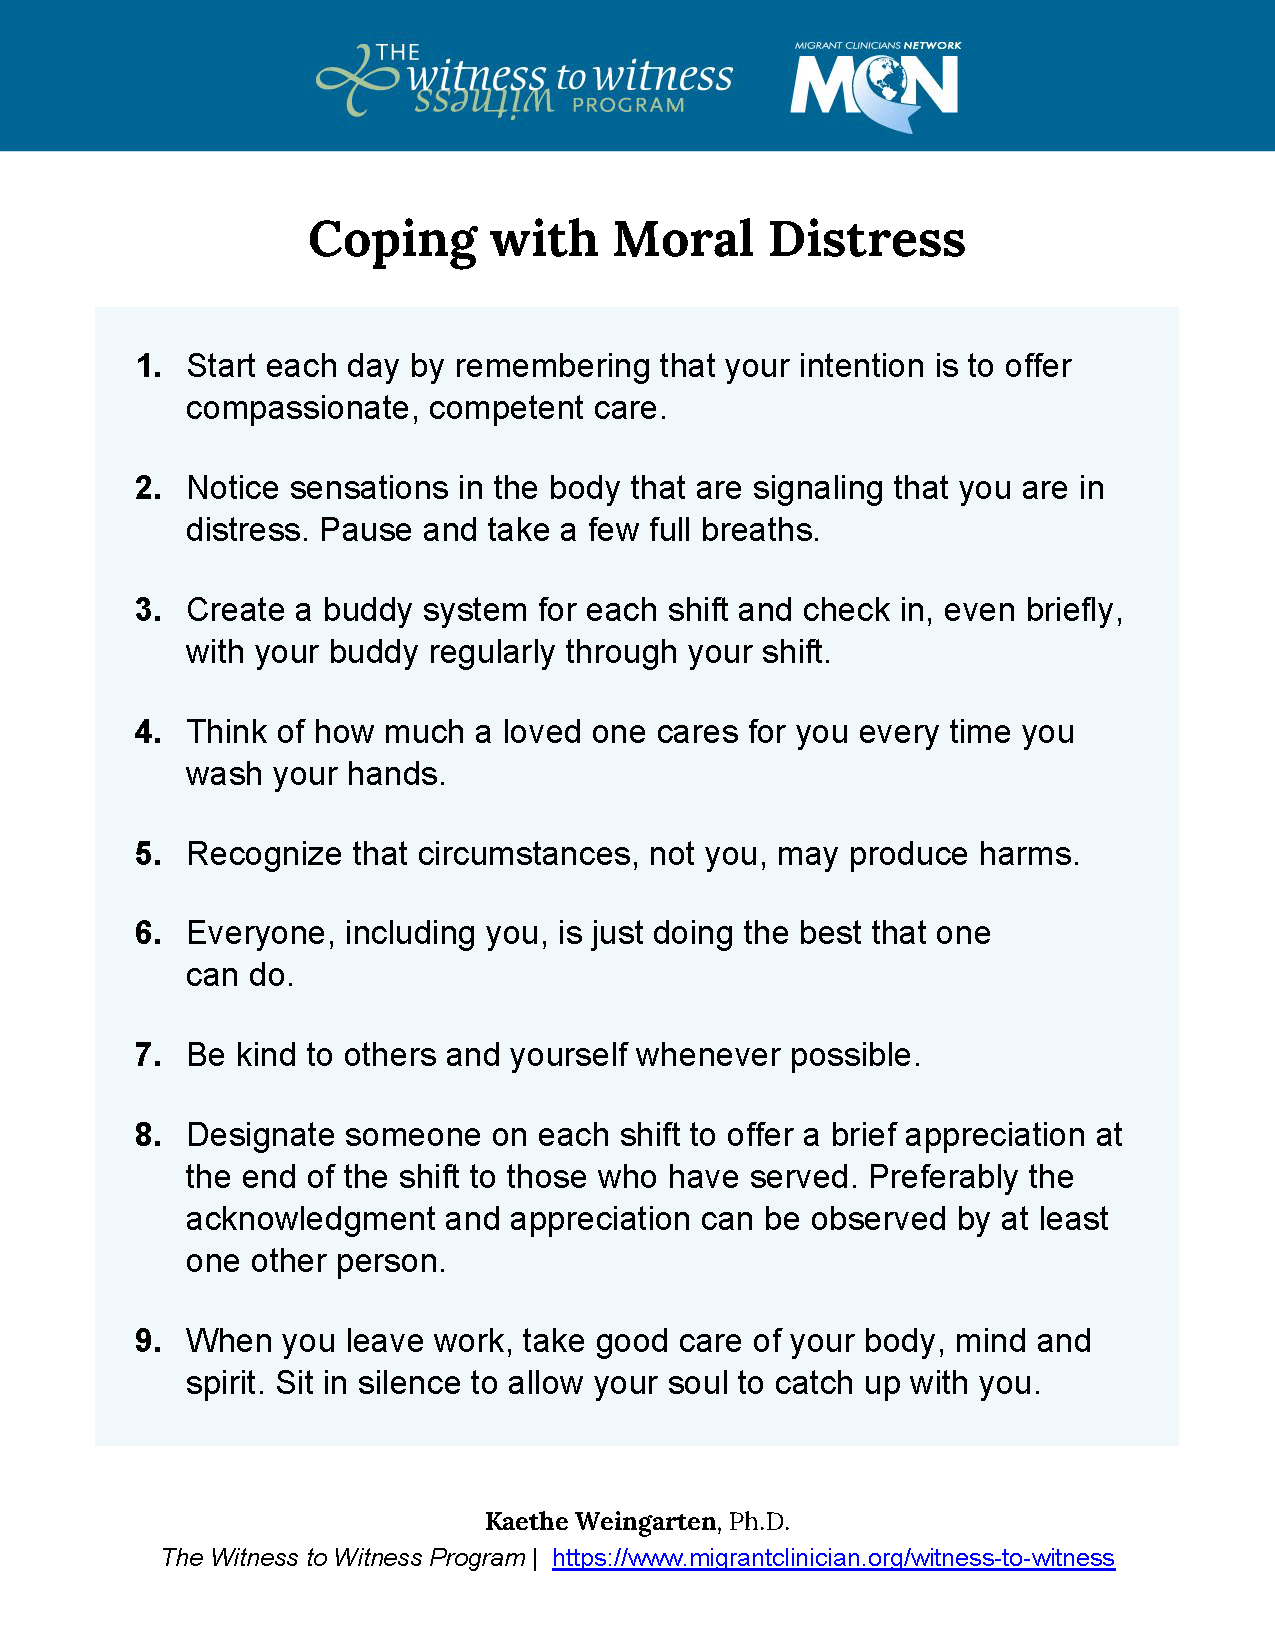 Coping with Moral Distress